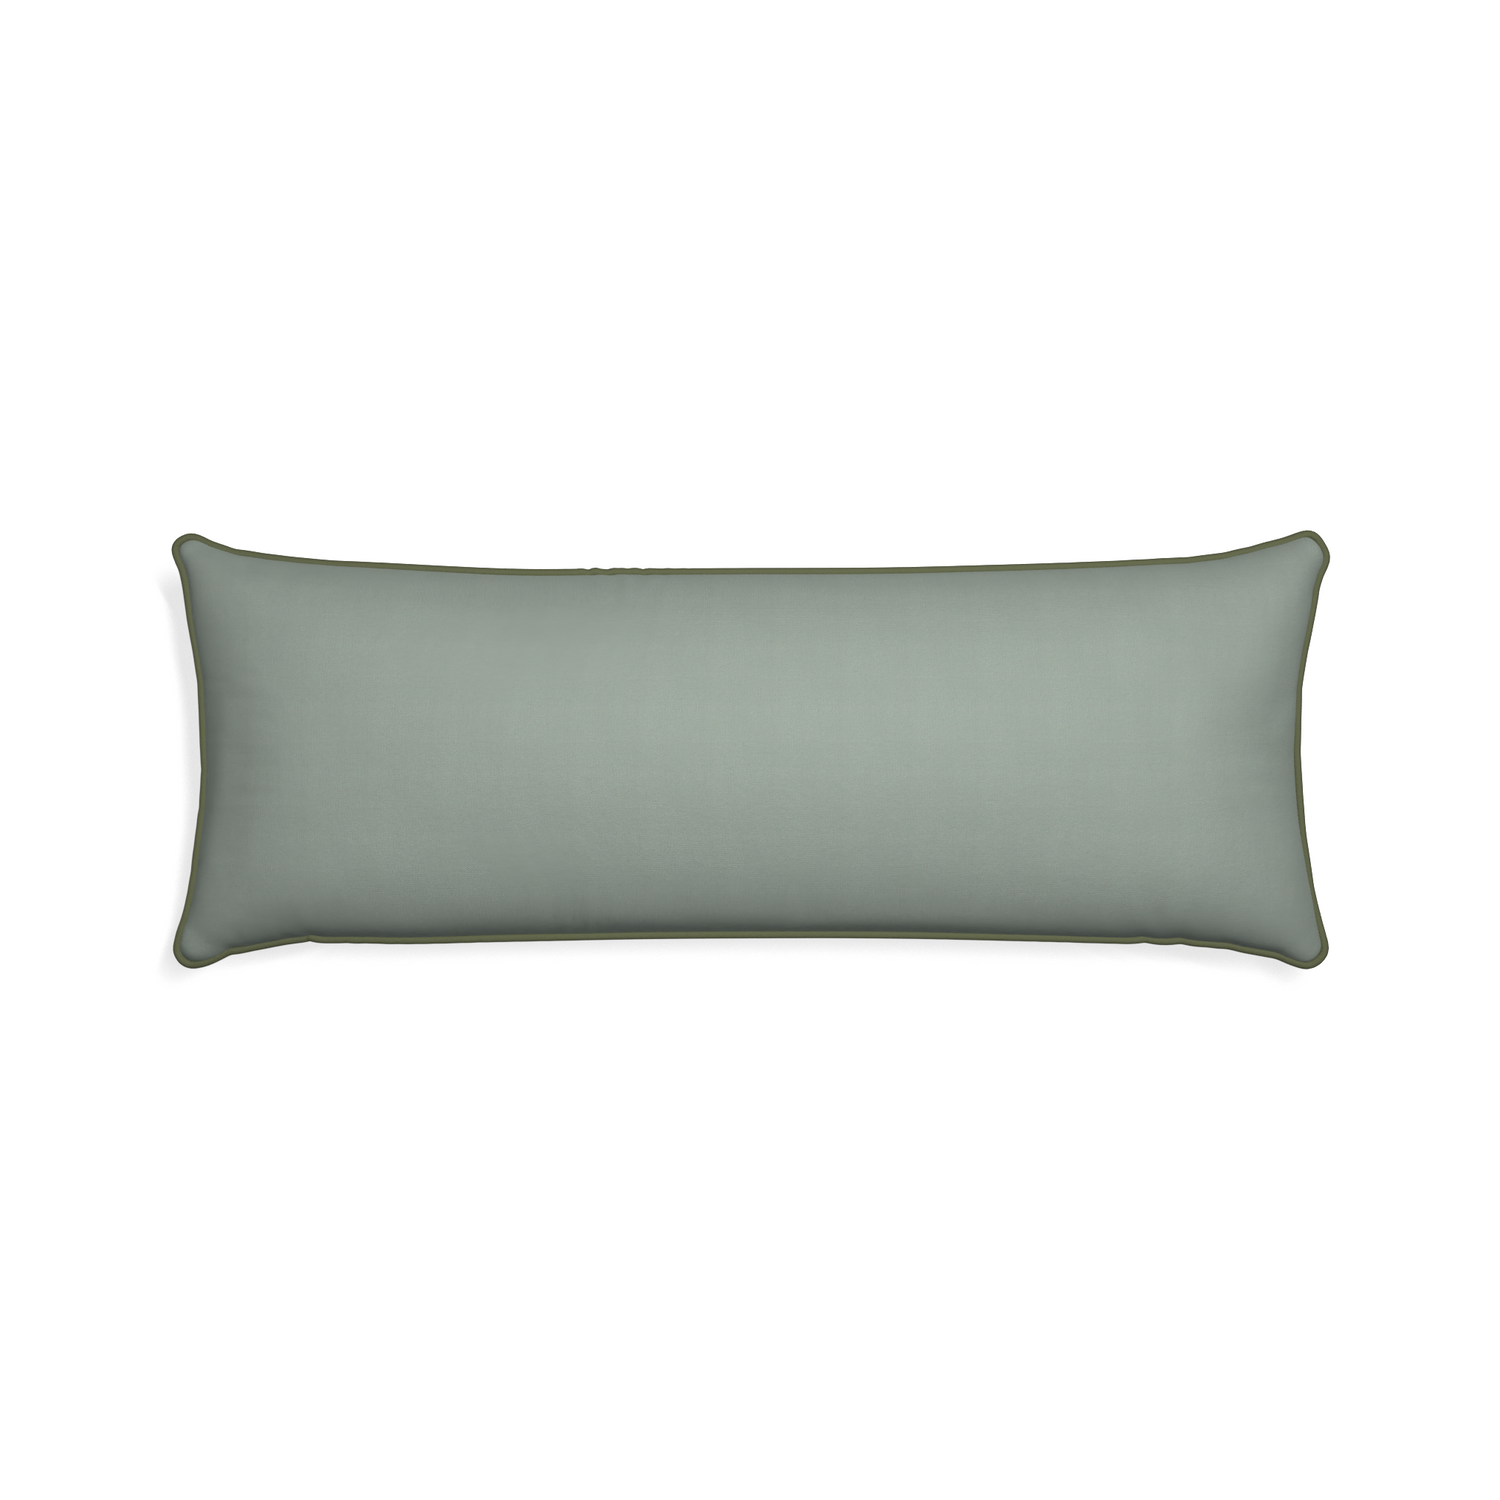 Xl-lumbar sage custom pillow with f piping on white background